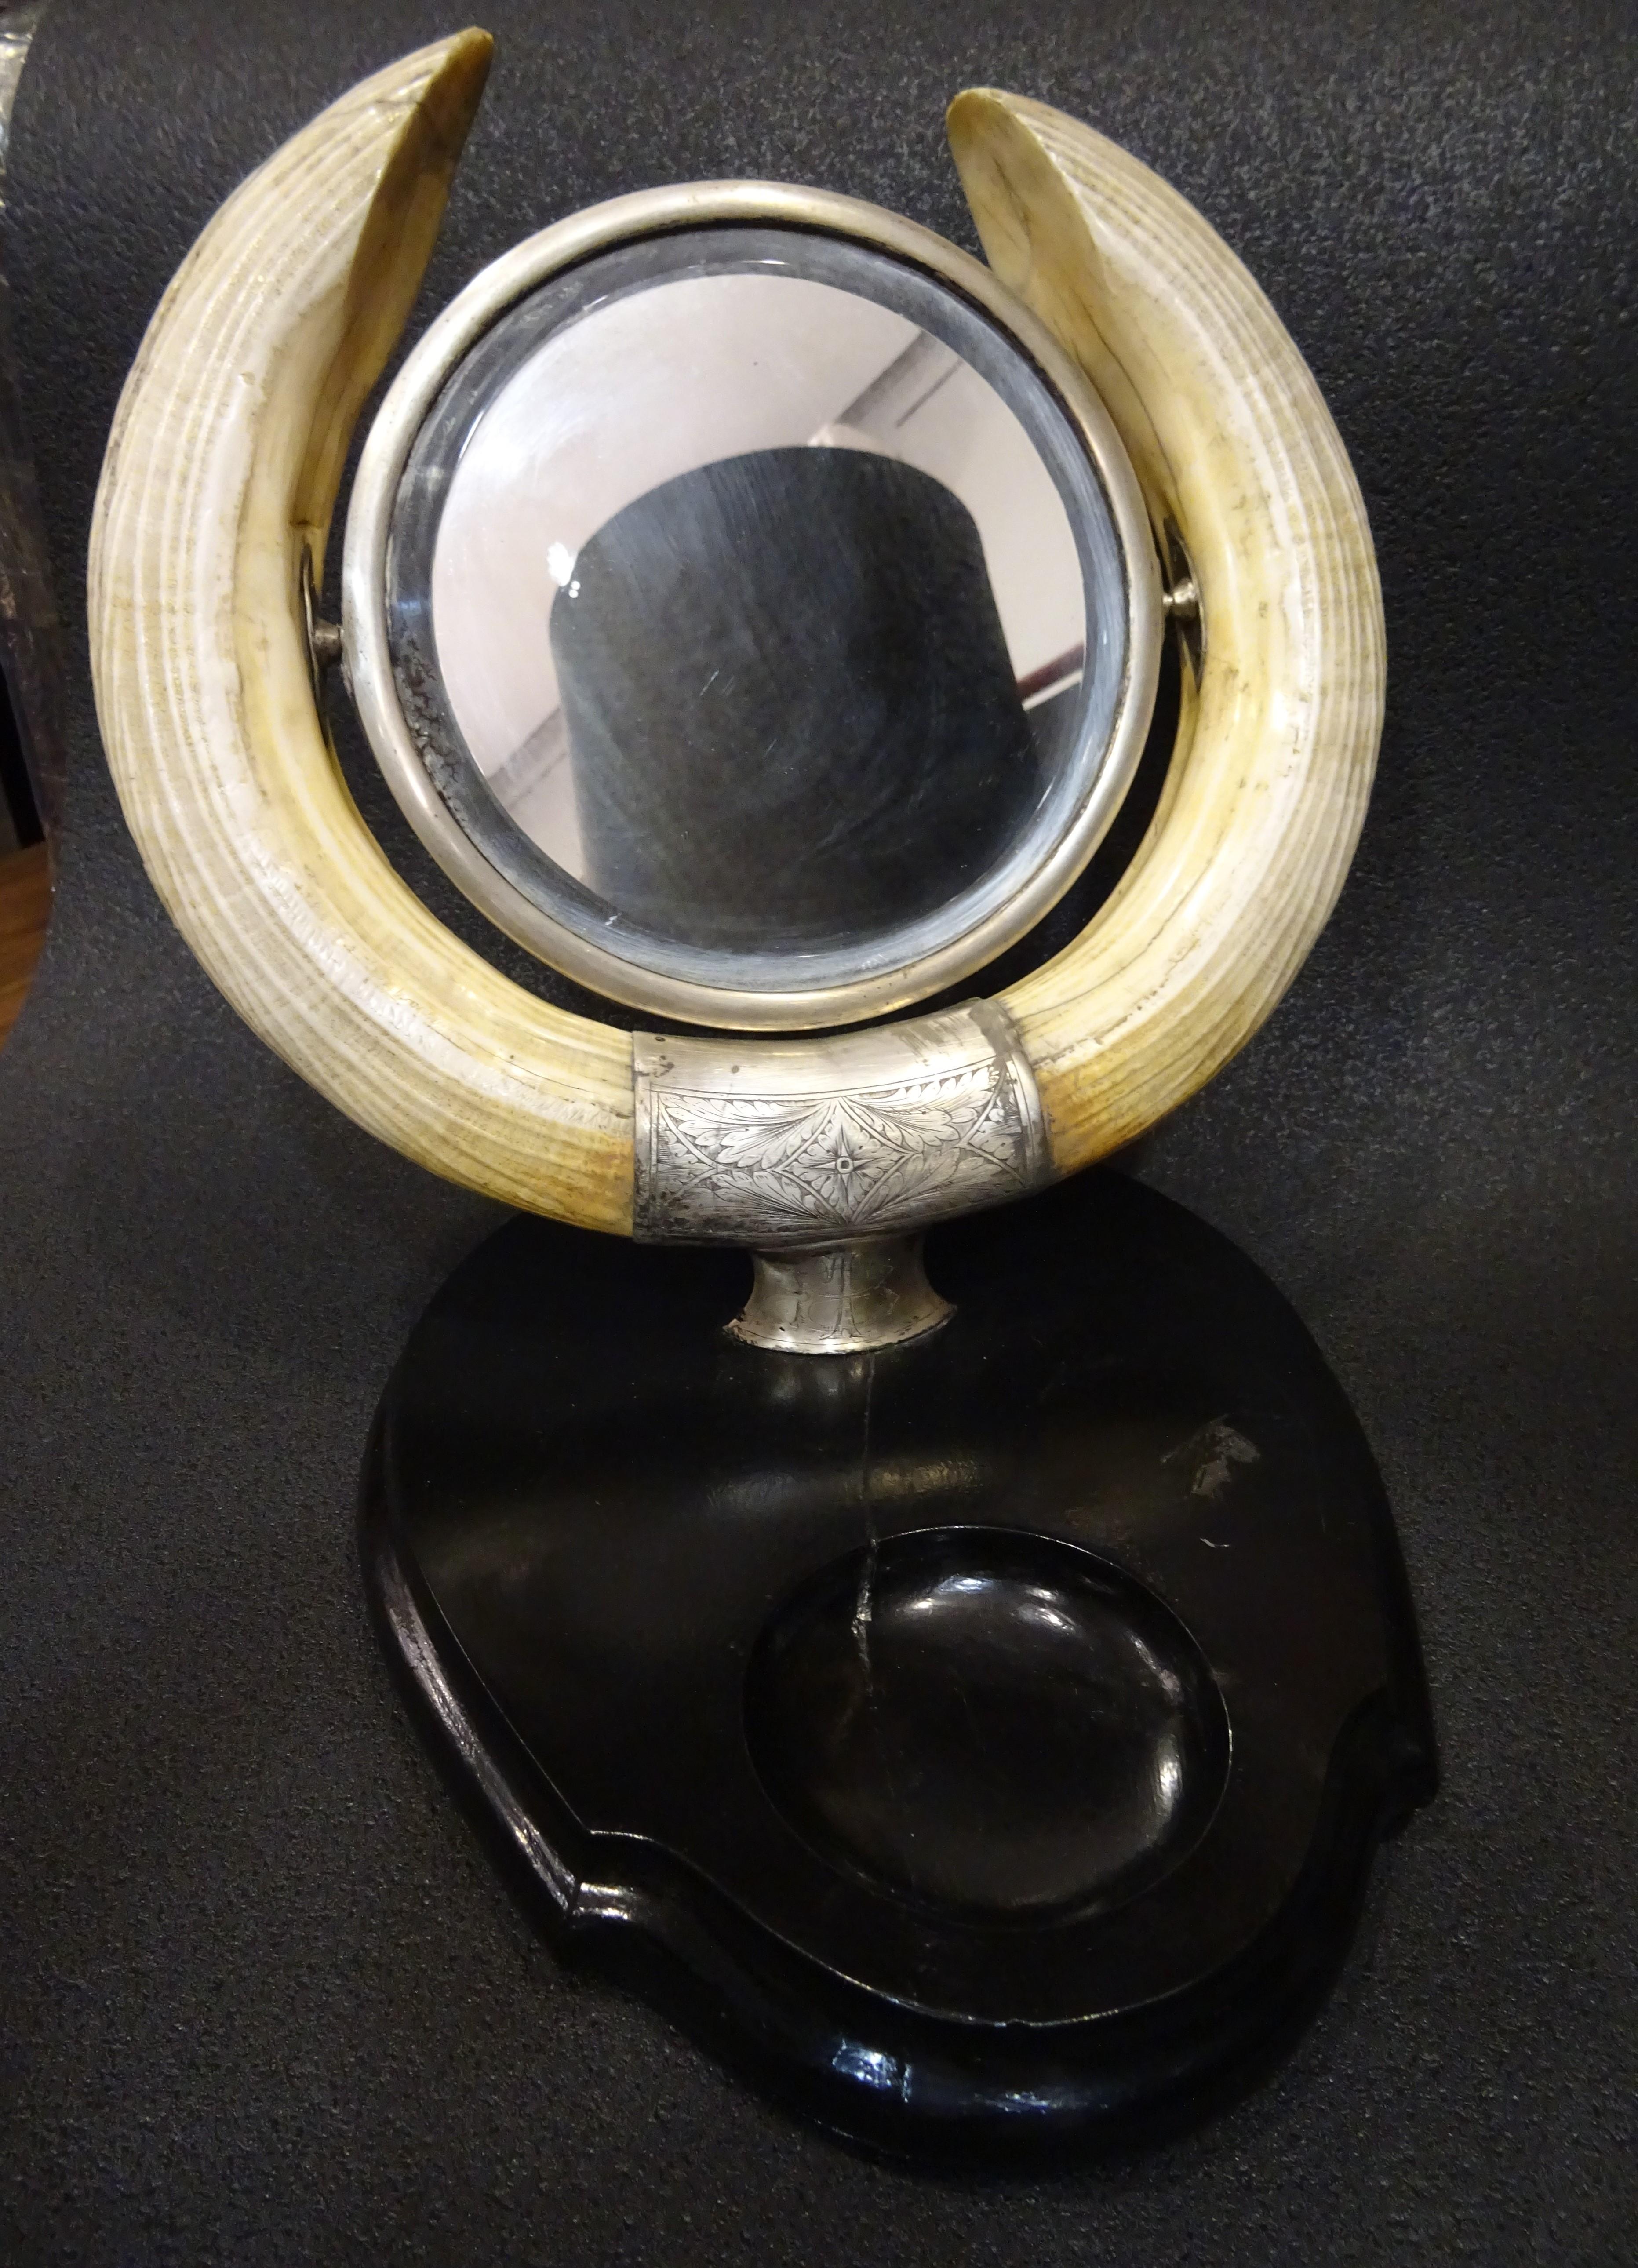 Outstanding vanity mirror, French Art Nouveau, circa 1900. Two hippo horns hold a tilting mirror enriched and decorated with silver, there are some initials in the front of the mirror.
The base is in ebonized wood with a hole to let the small